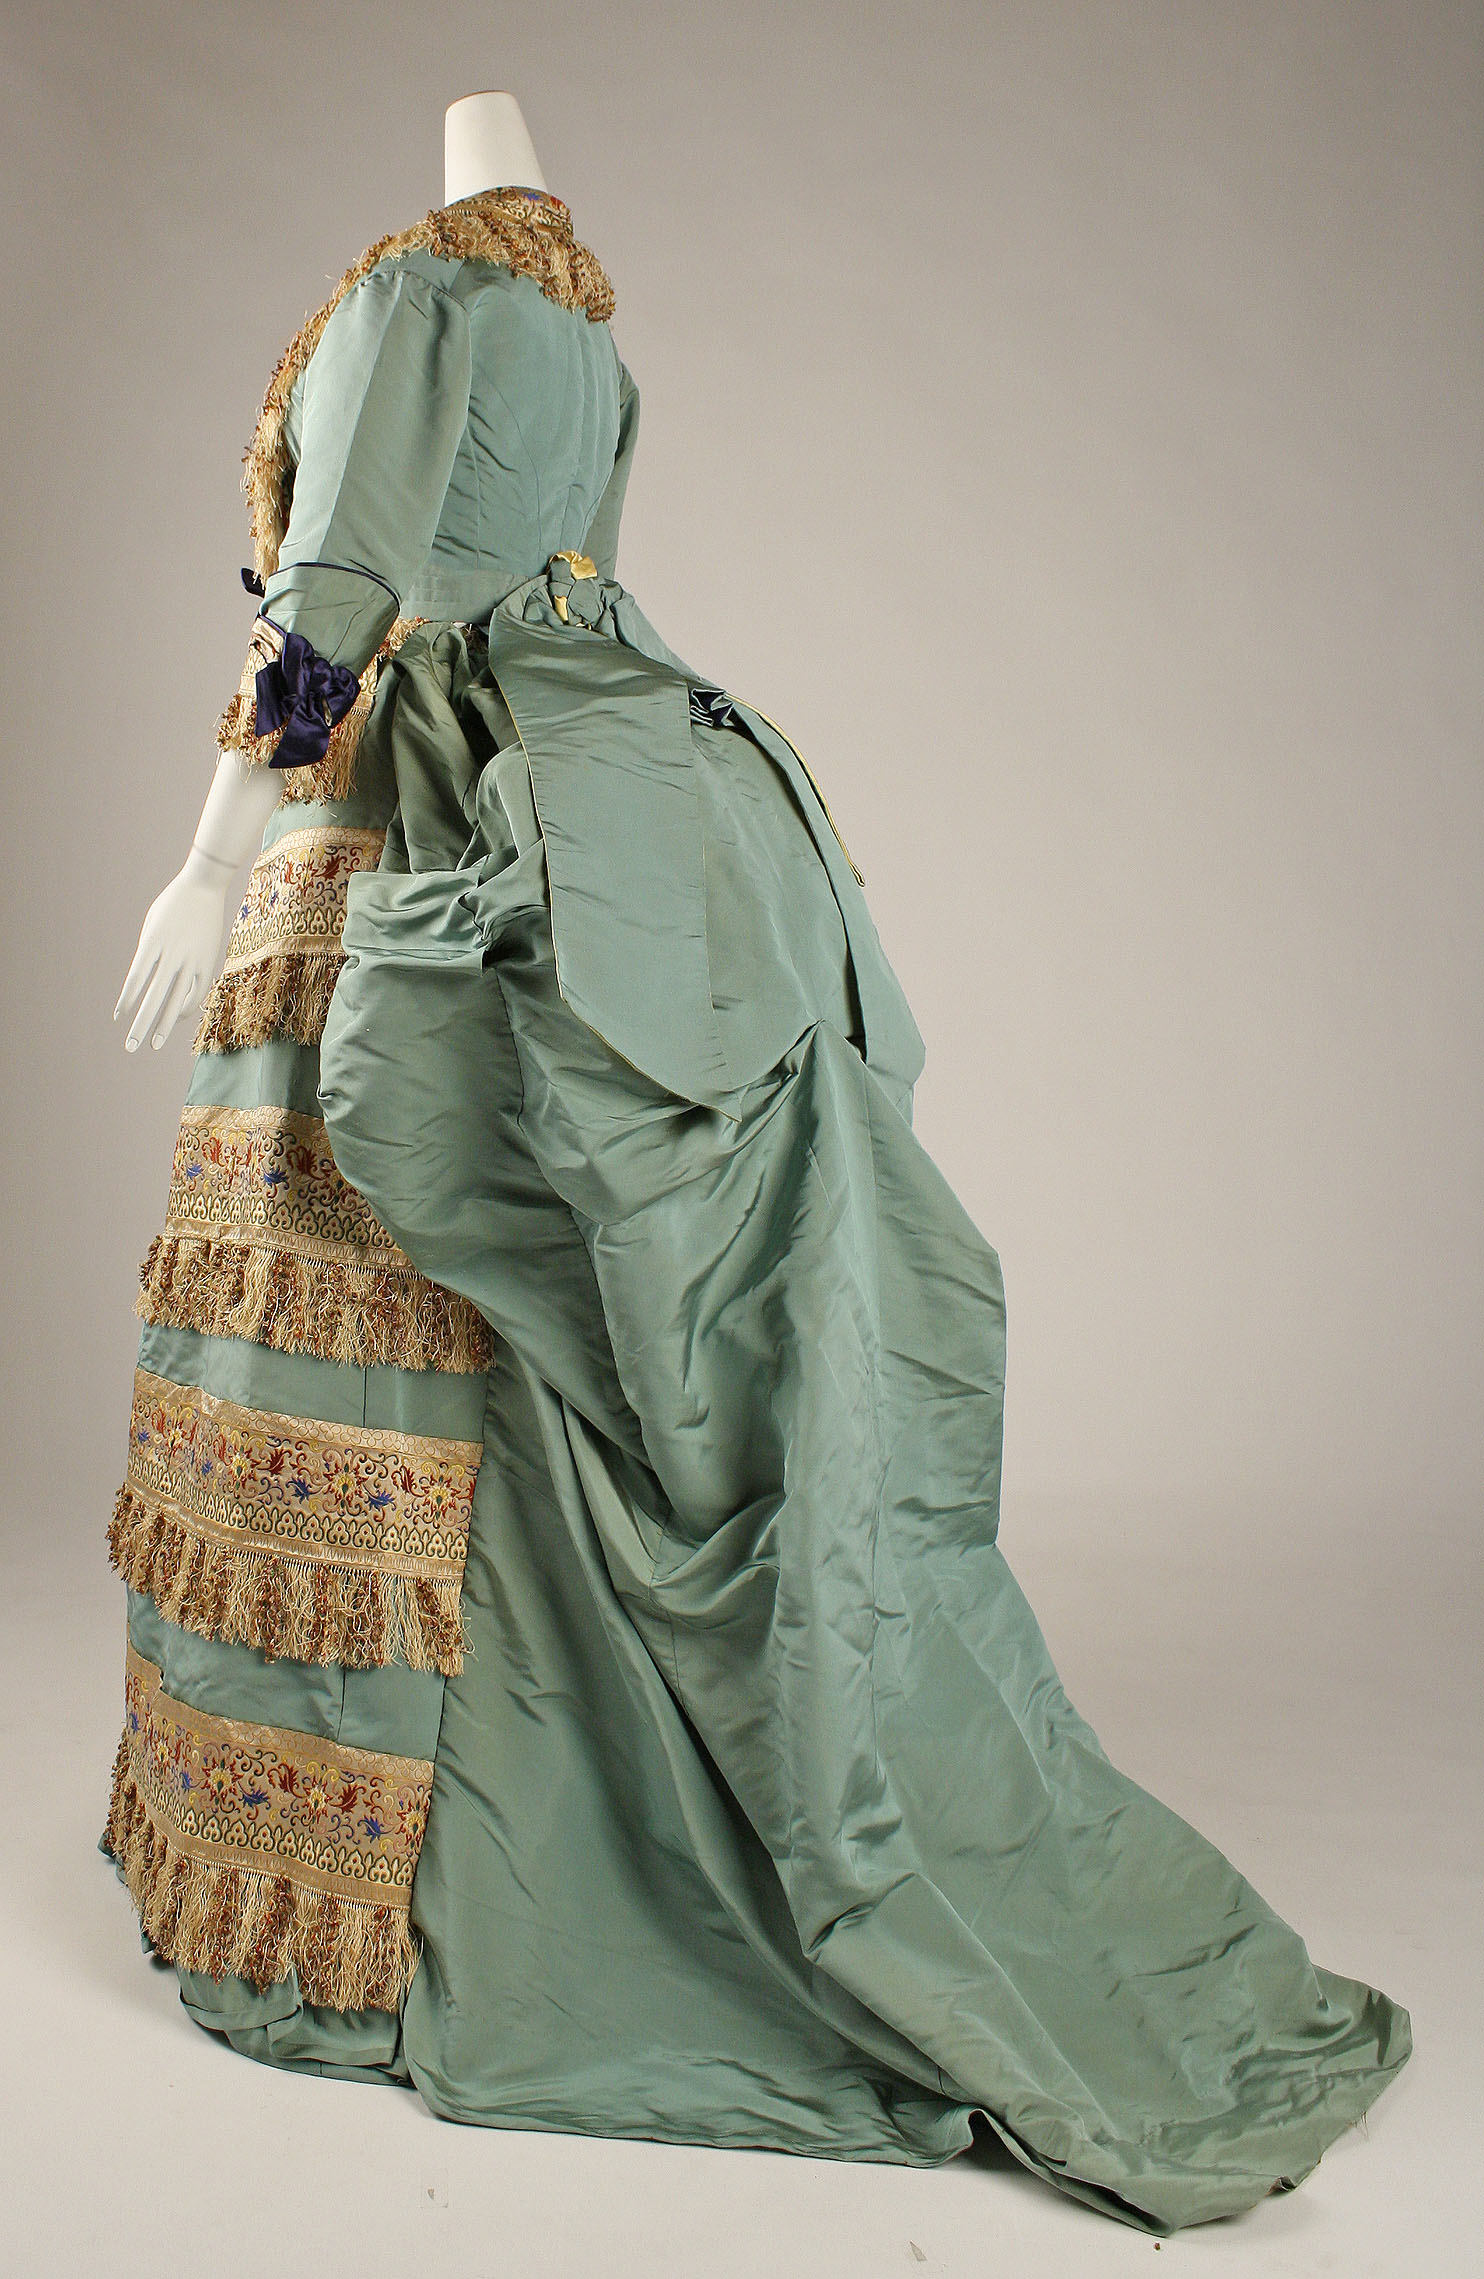 Worth evening / ball gown of Empress Eugenie of France, one of his earliest  patrons (1866-67) : r/fashionhistory